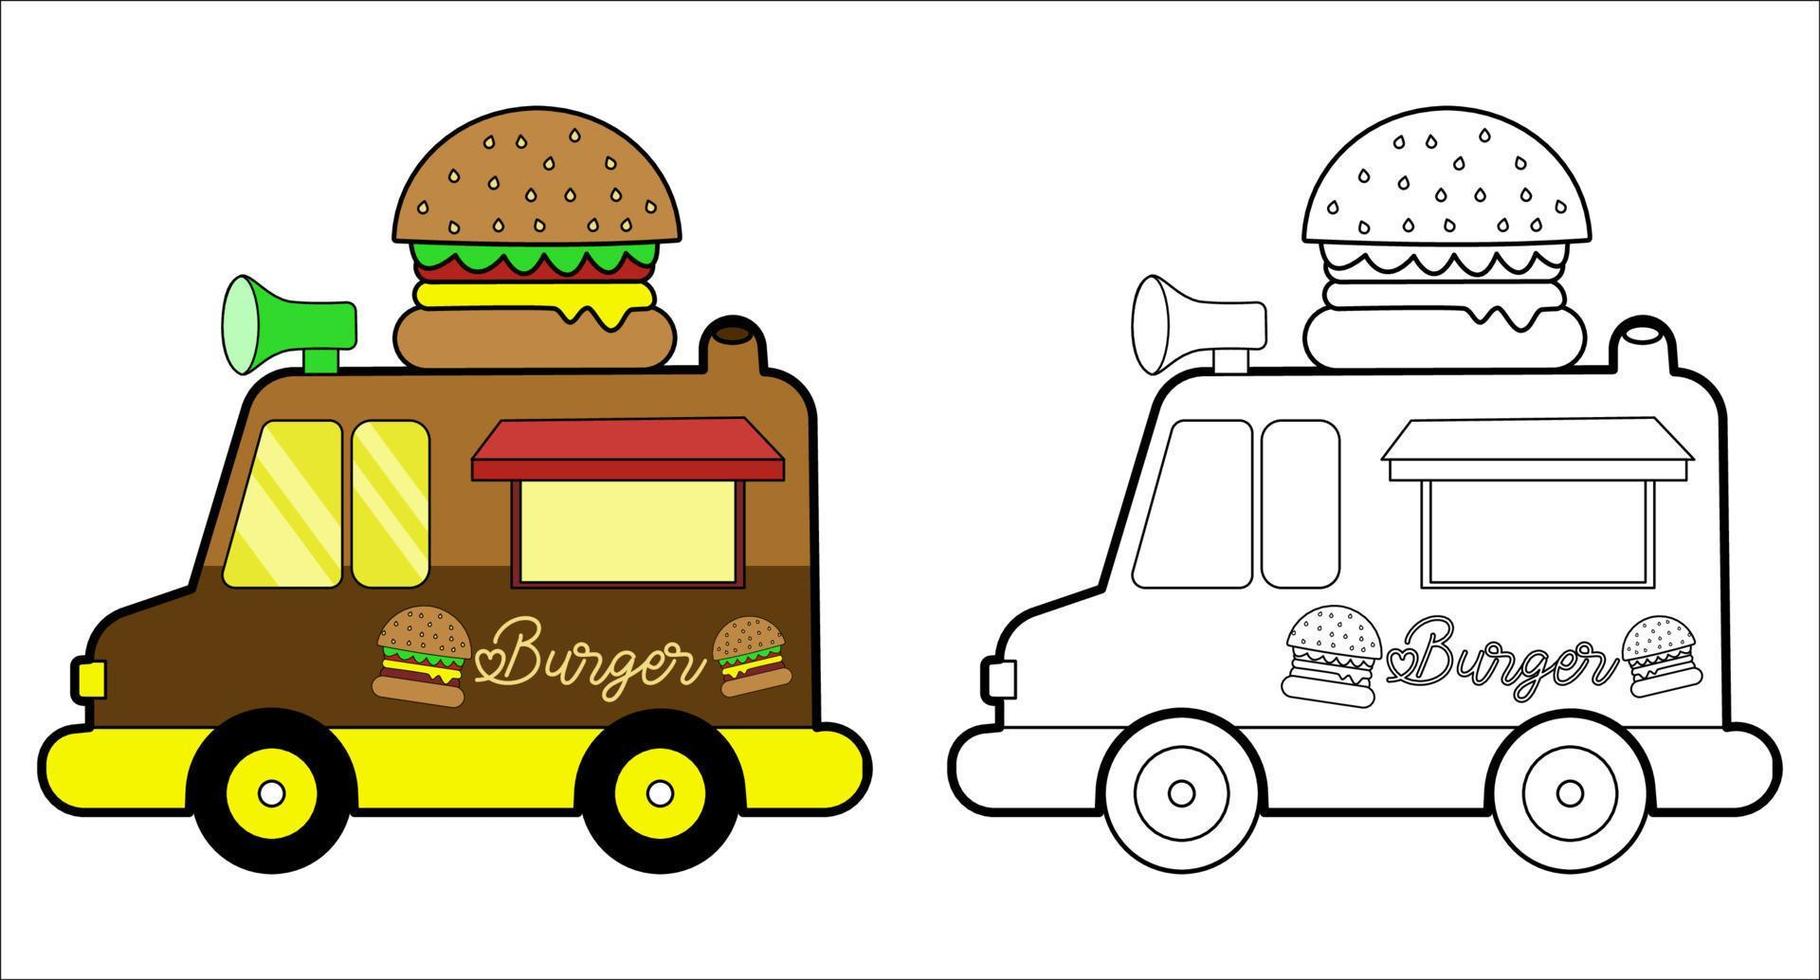 Coloring book. Cartoon fast-food car with a big hamburger for kids activity colouring pages. Vector illustration